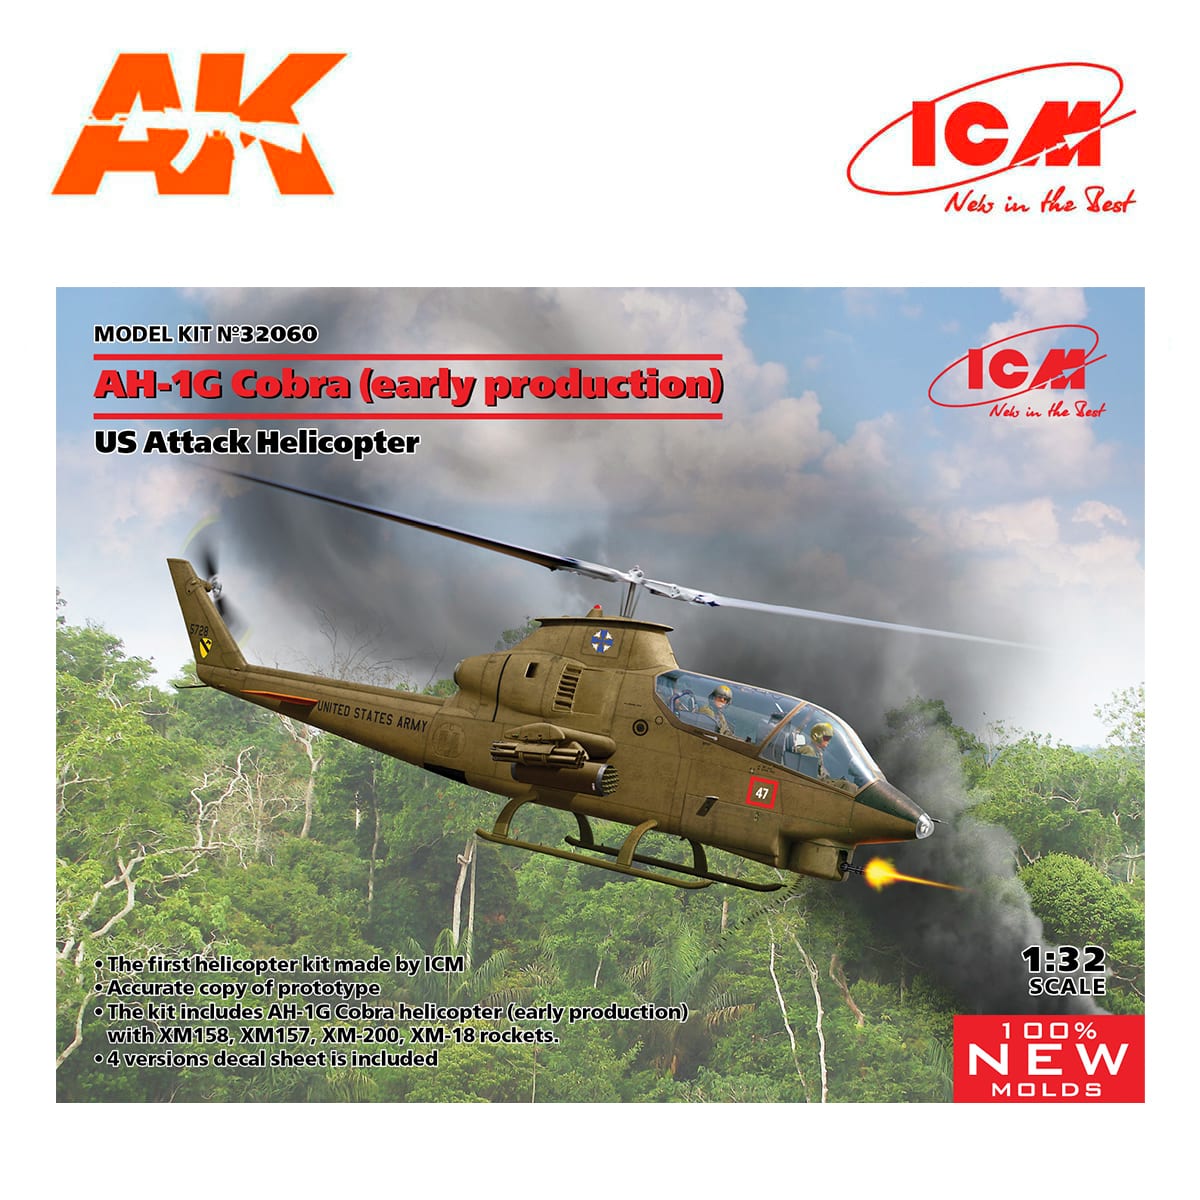 AH-1G Cobra (early production), US Attack Helicopter (100% new molds) 1/32